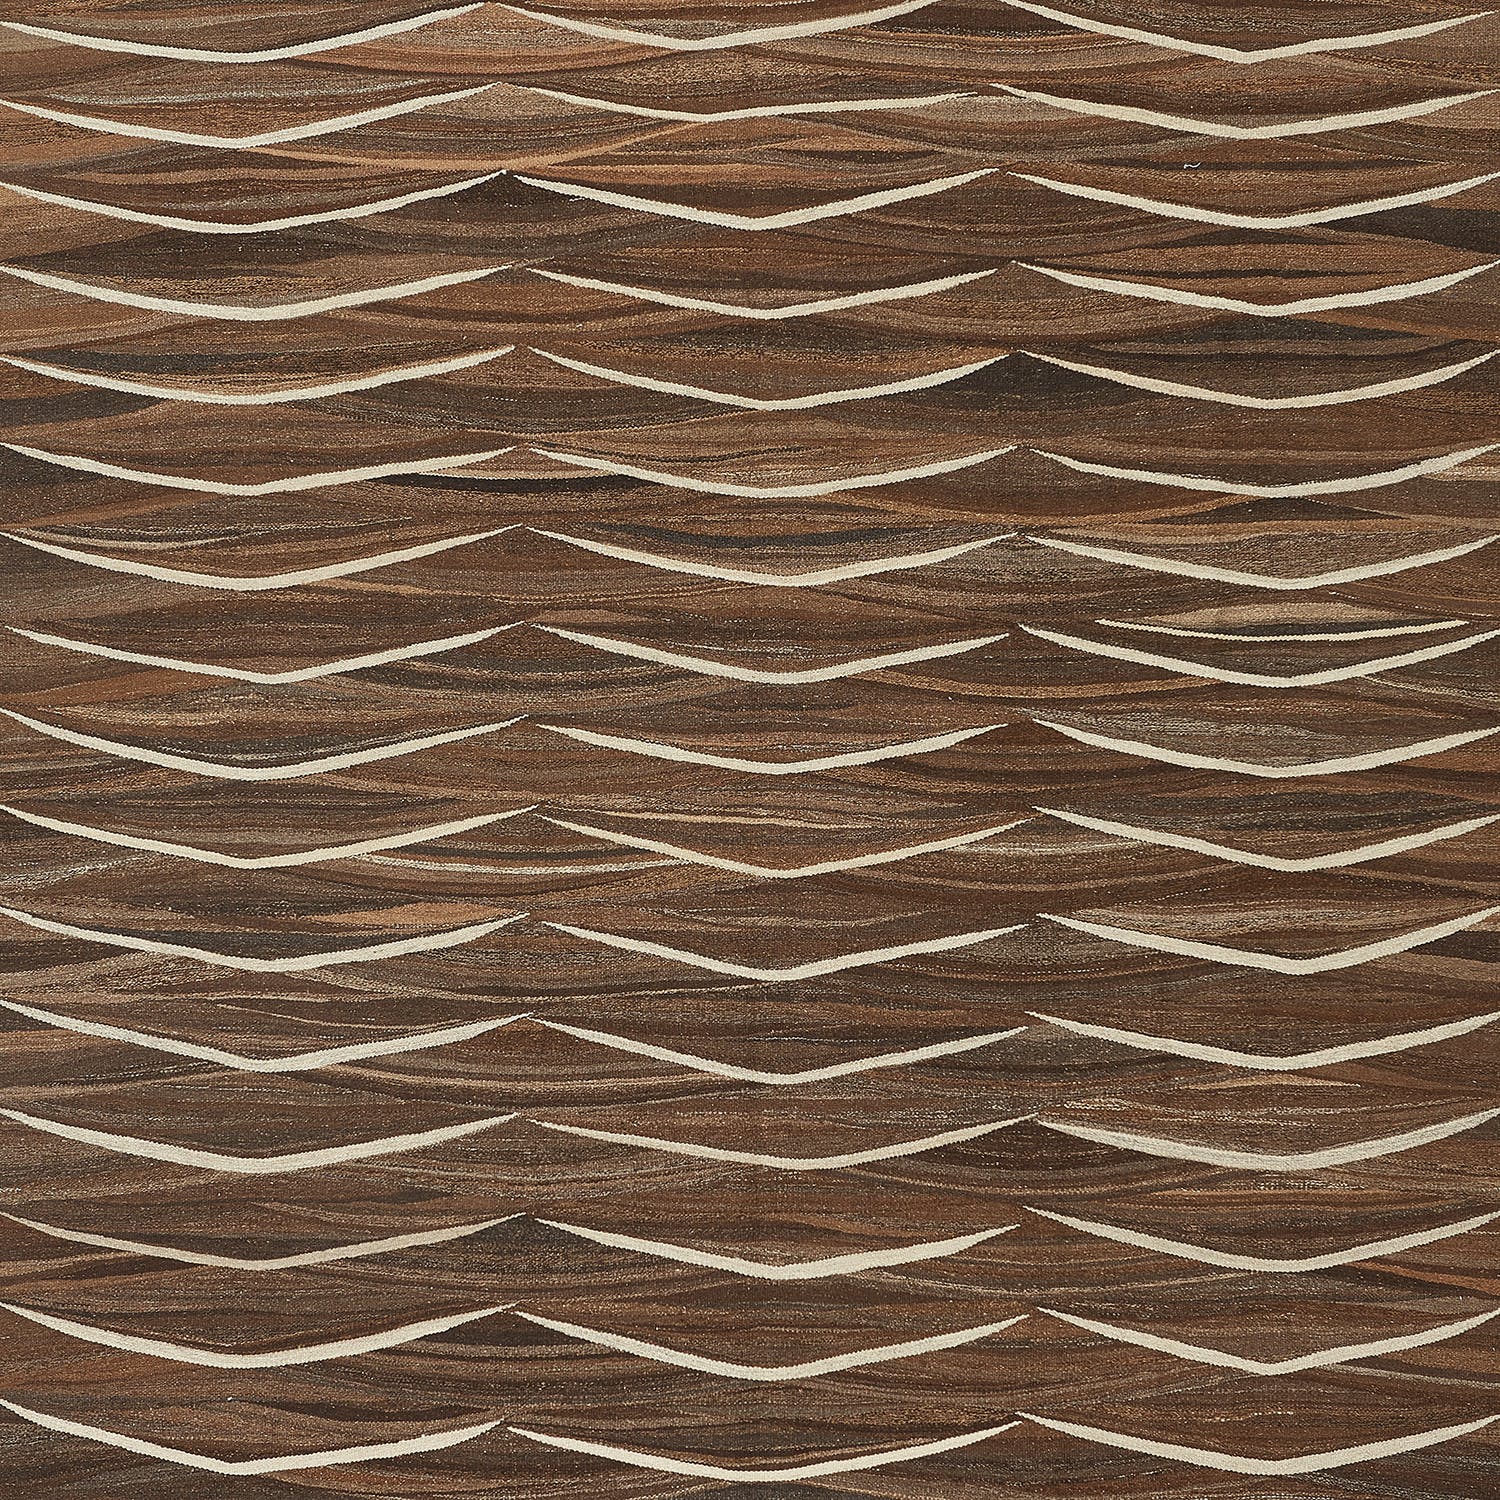 Patterned wood surface with herringbone design adds rustic charm.